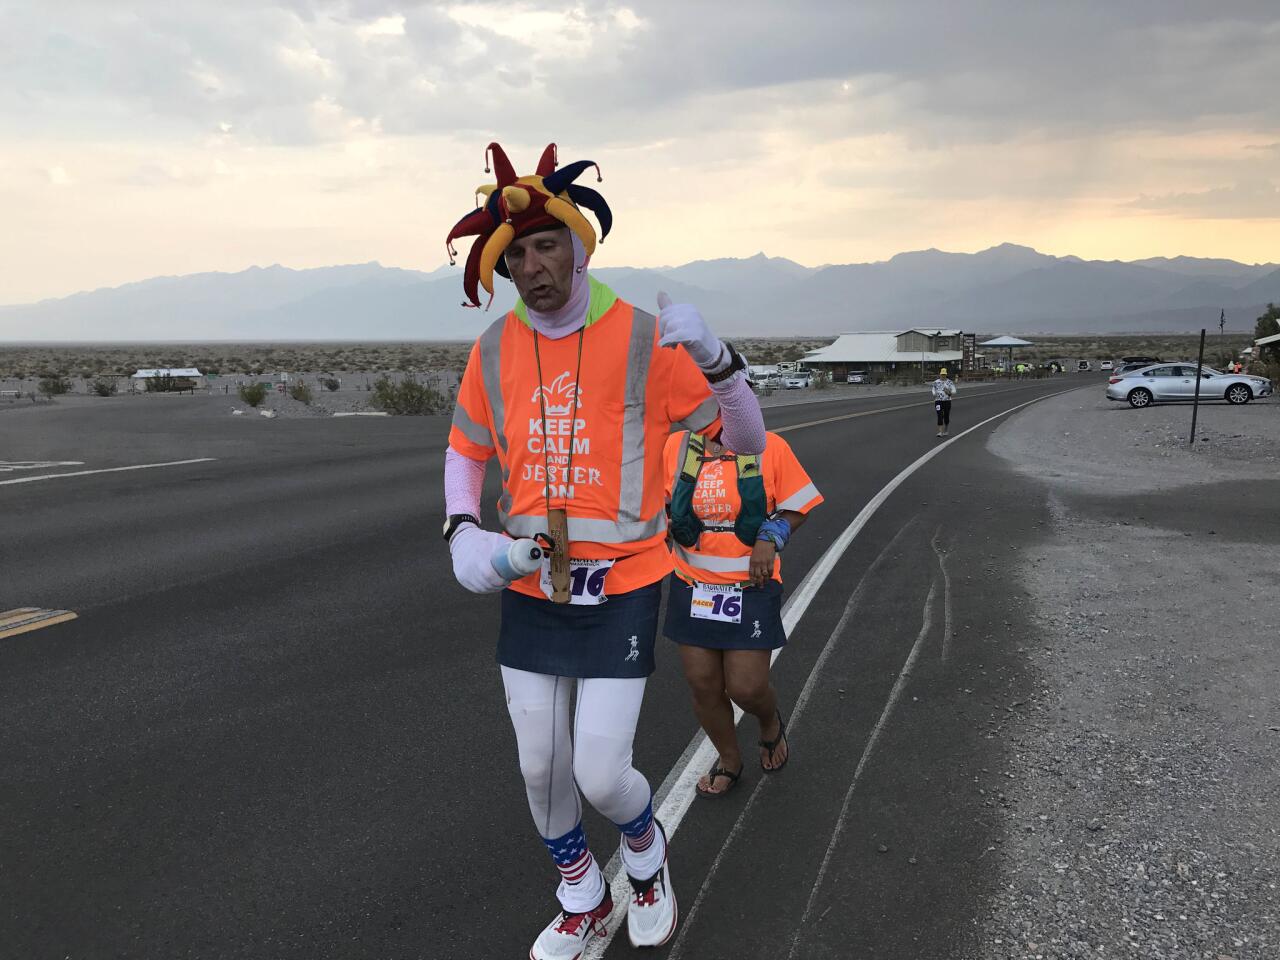 Ed Ettinghausen, 54, of Murrietta, CA, holds the world's record for the most 100-mile runs. He puts ice under his jester's hat to stay cool. He is at Mile 42 of 135.